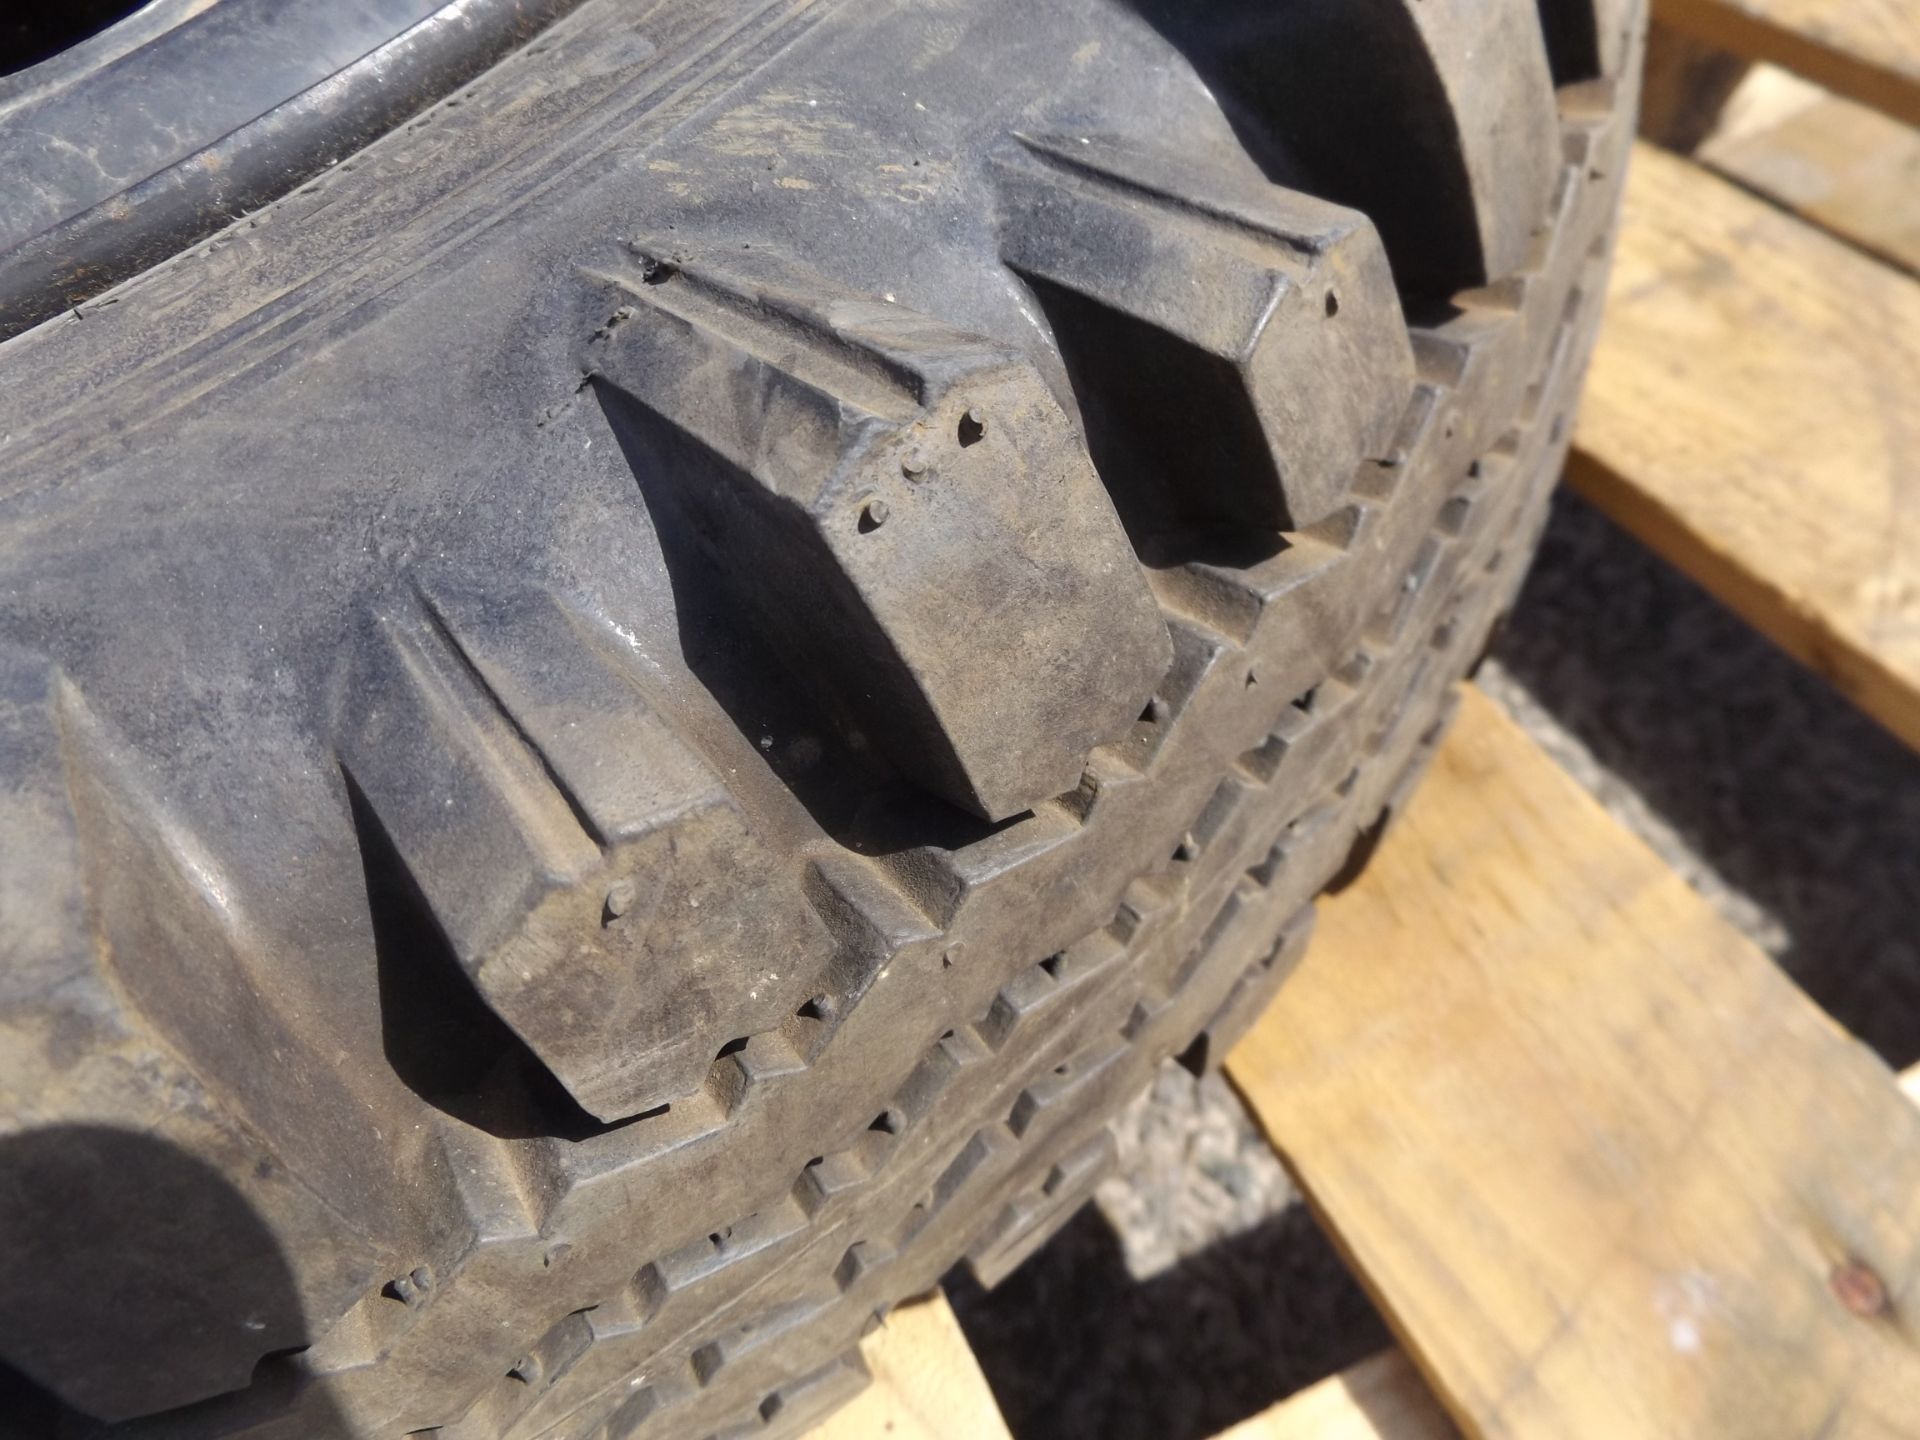 The Holy Grail of Tyres, 1 x Avon Traction Mileage 6.50 x 16 8 Ply Tyre complete with 5 stud rim - Image 5 of 5